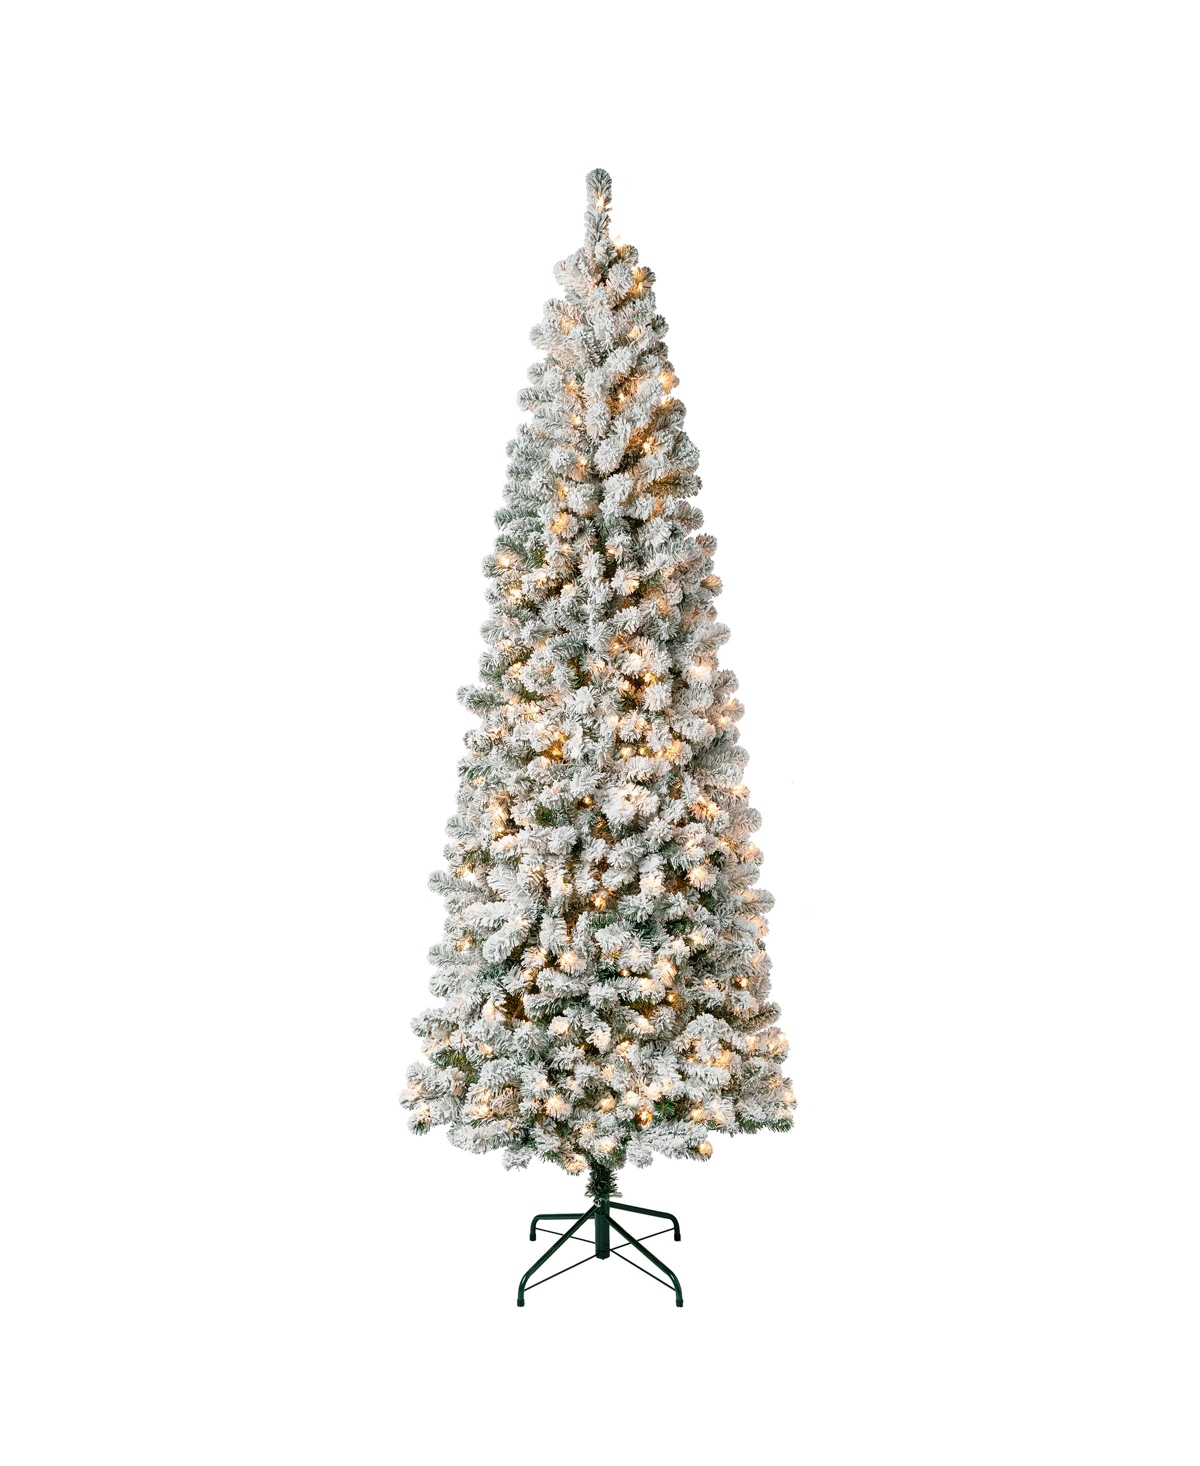 National Tree Company First Traditions 7.5' Acacia Medium Flocked Tree With Clear Lights In Green